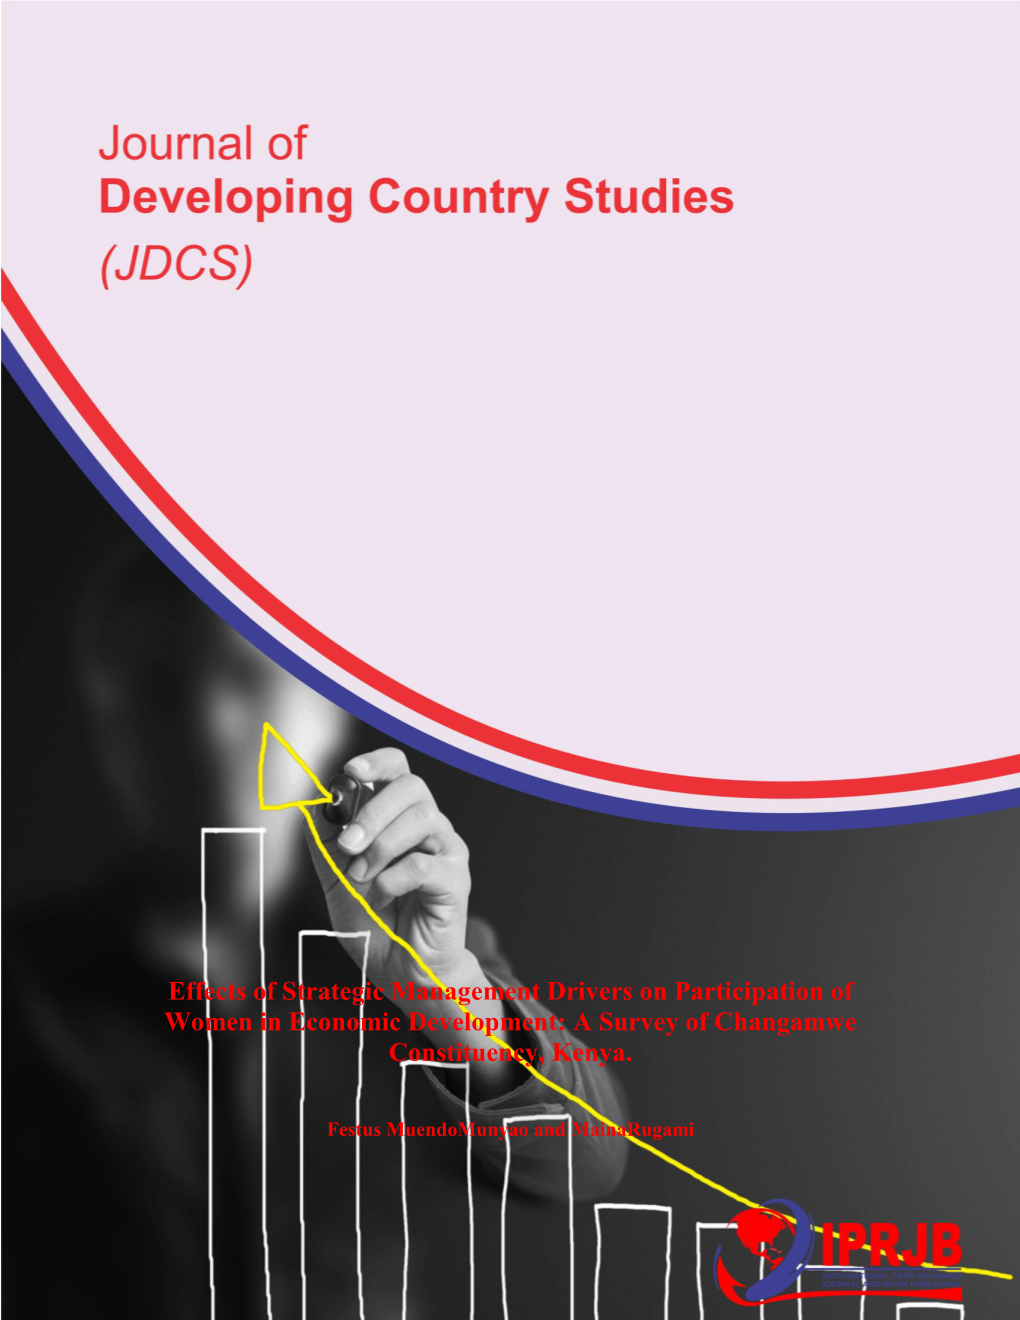 Effects of Strategic Management Drivers on Participation of Women in Economic Development: a Survey of Changamwe Constituency, Kenya